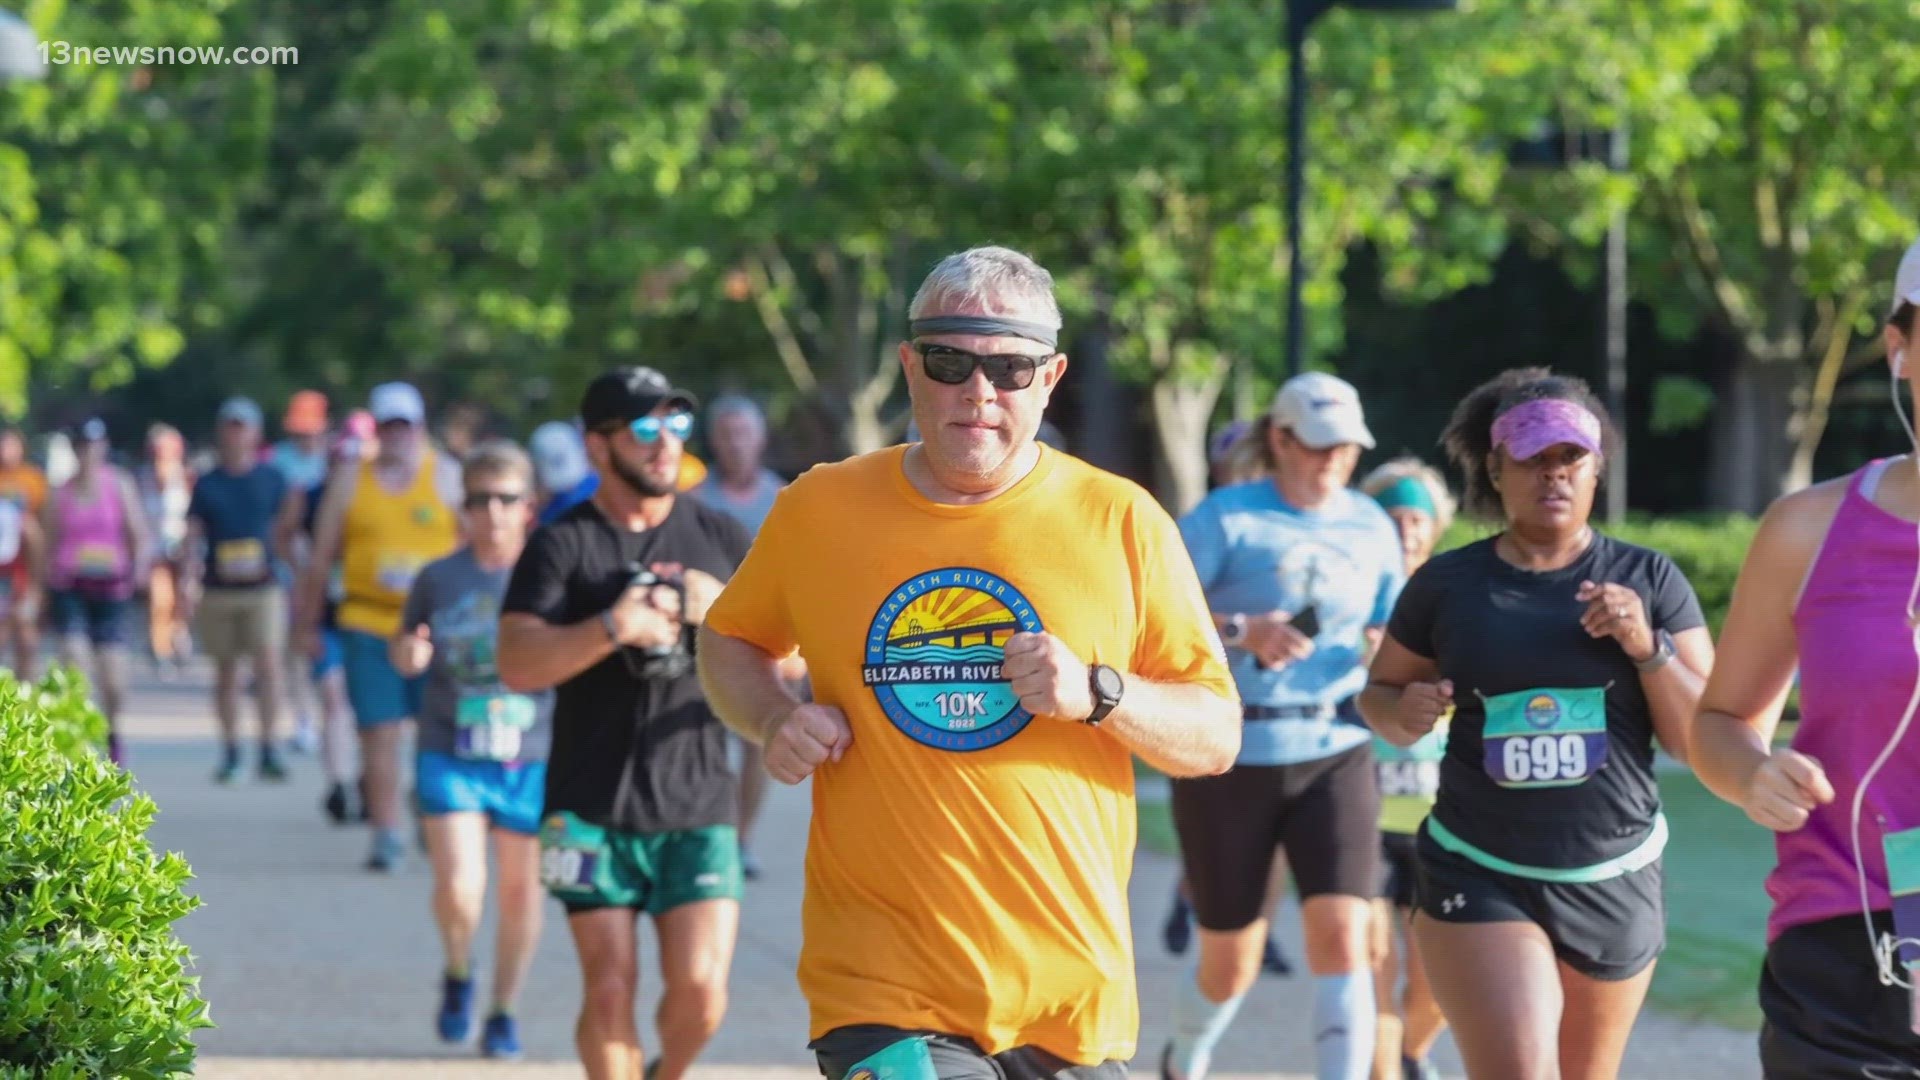 The 44th annual Elizabeth River Run is happening this weekend and the race is helping out a staple in the City of Norfolk.